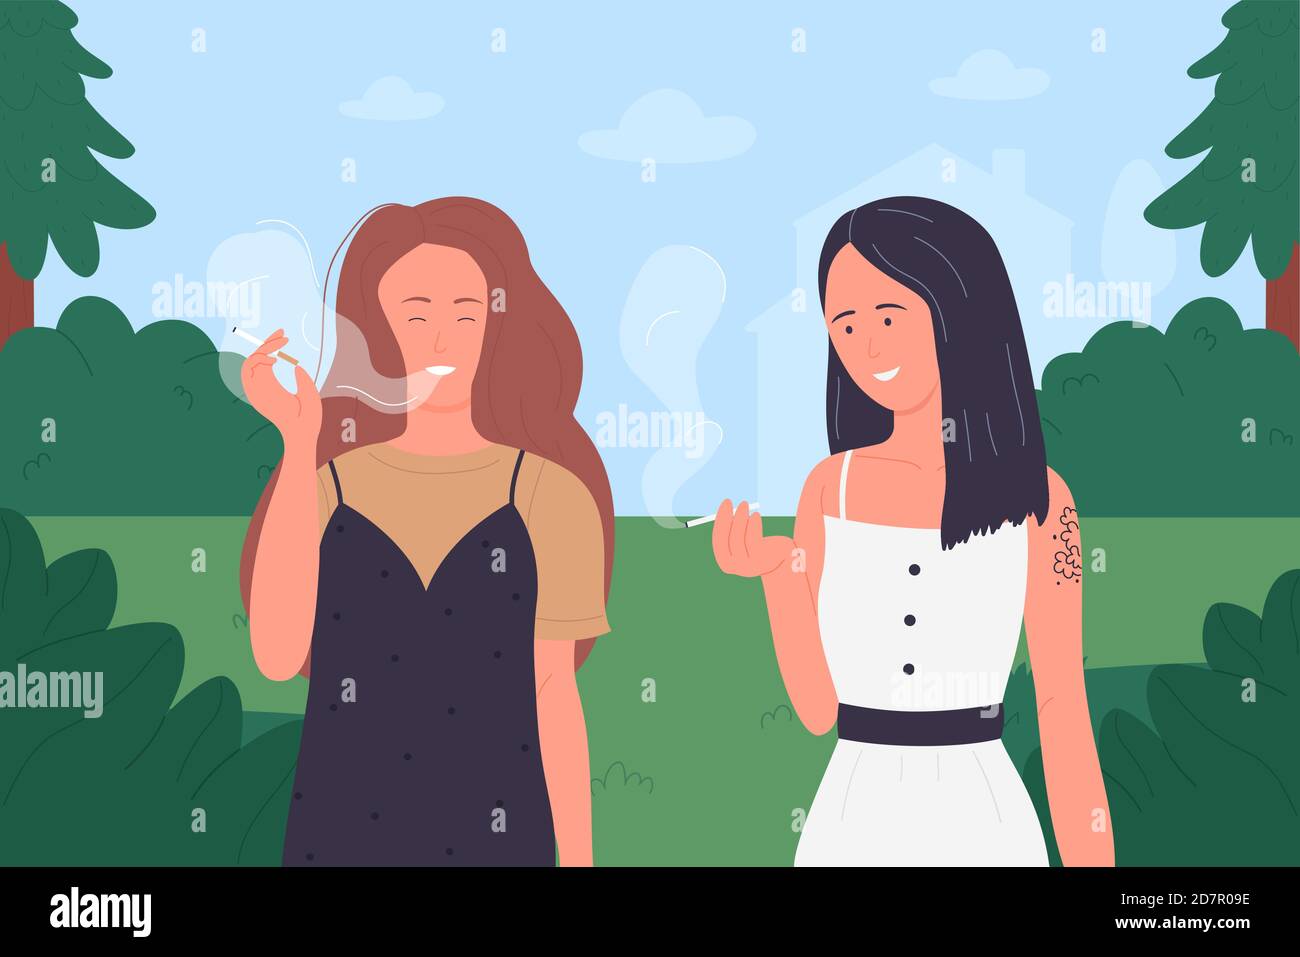 Girls smoke vector illustration. Cartoon young smoker woman friends group holding cigarettes, pretty funny female characters smoking tobacco or marijuana at summer green nature landscape background Stock Vector